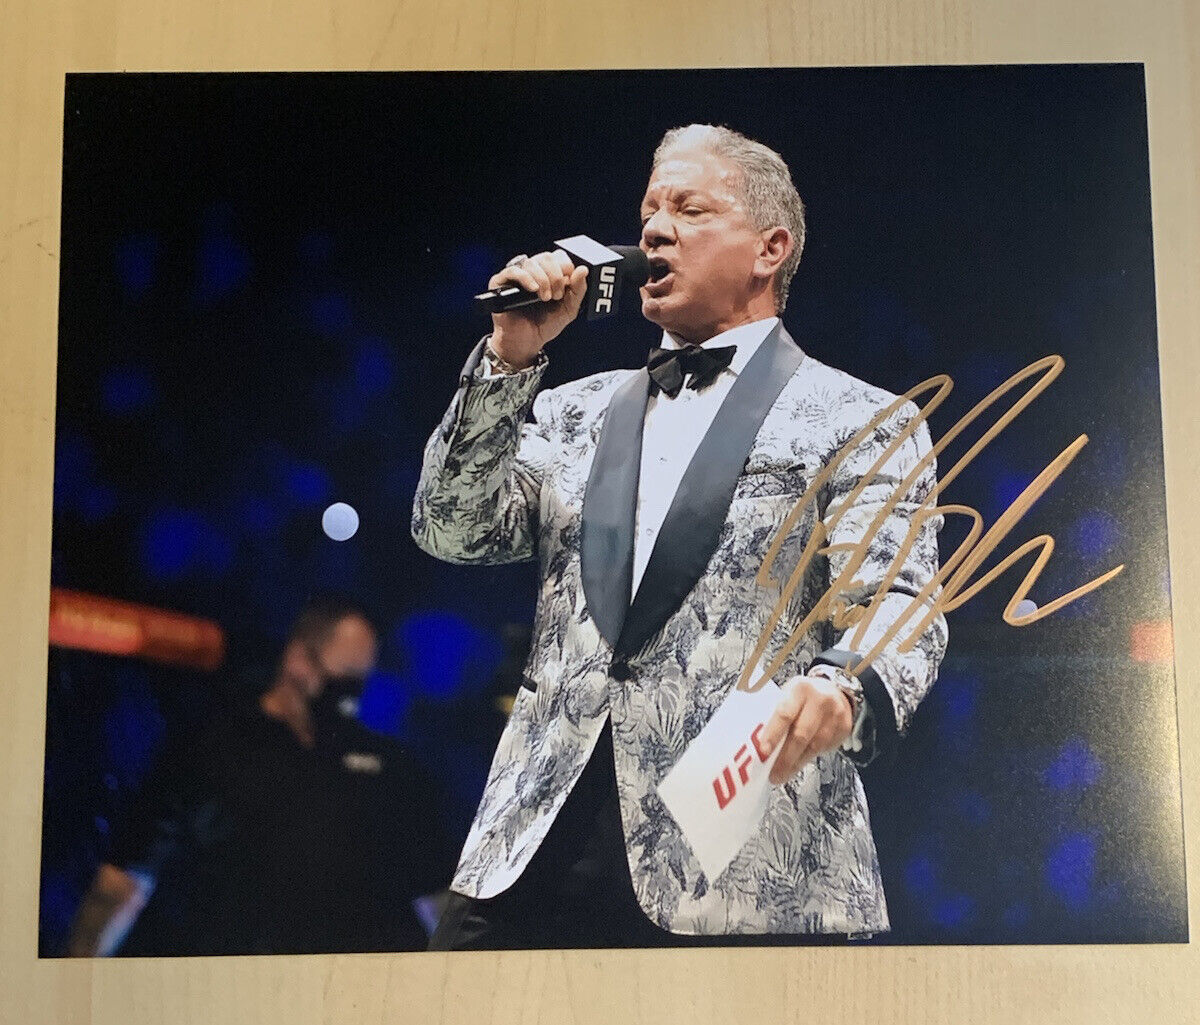 BRUCE BUFFER HAND SIGNED 8x10 Photo Poster painting AUTOGRAPHED UFC RING ANNOUNCER LEGEND COA